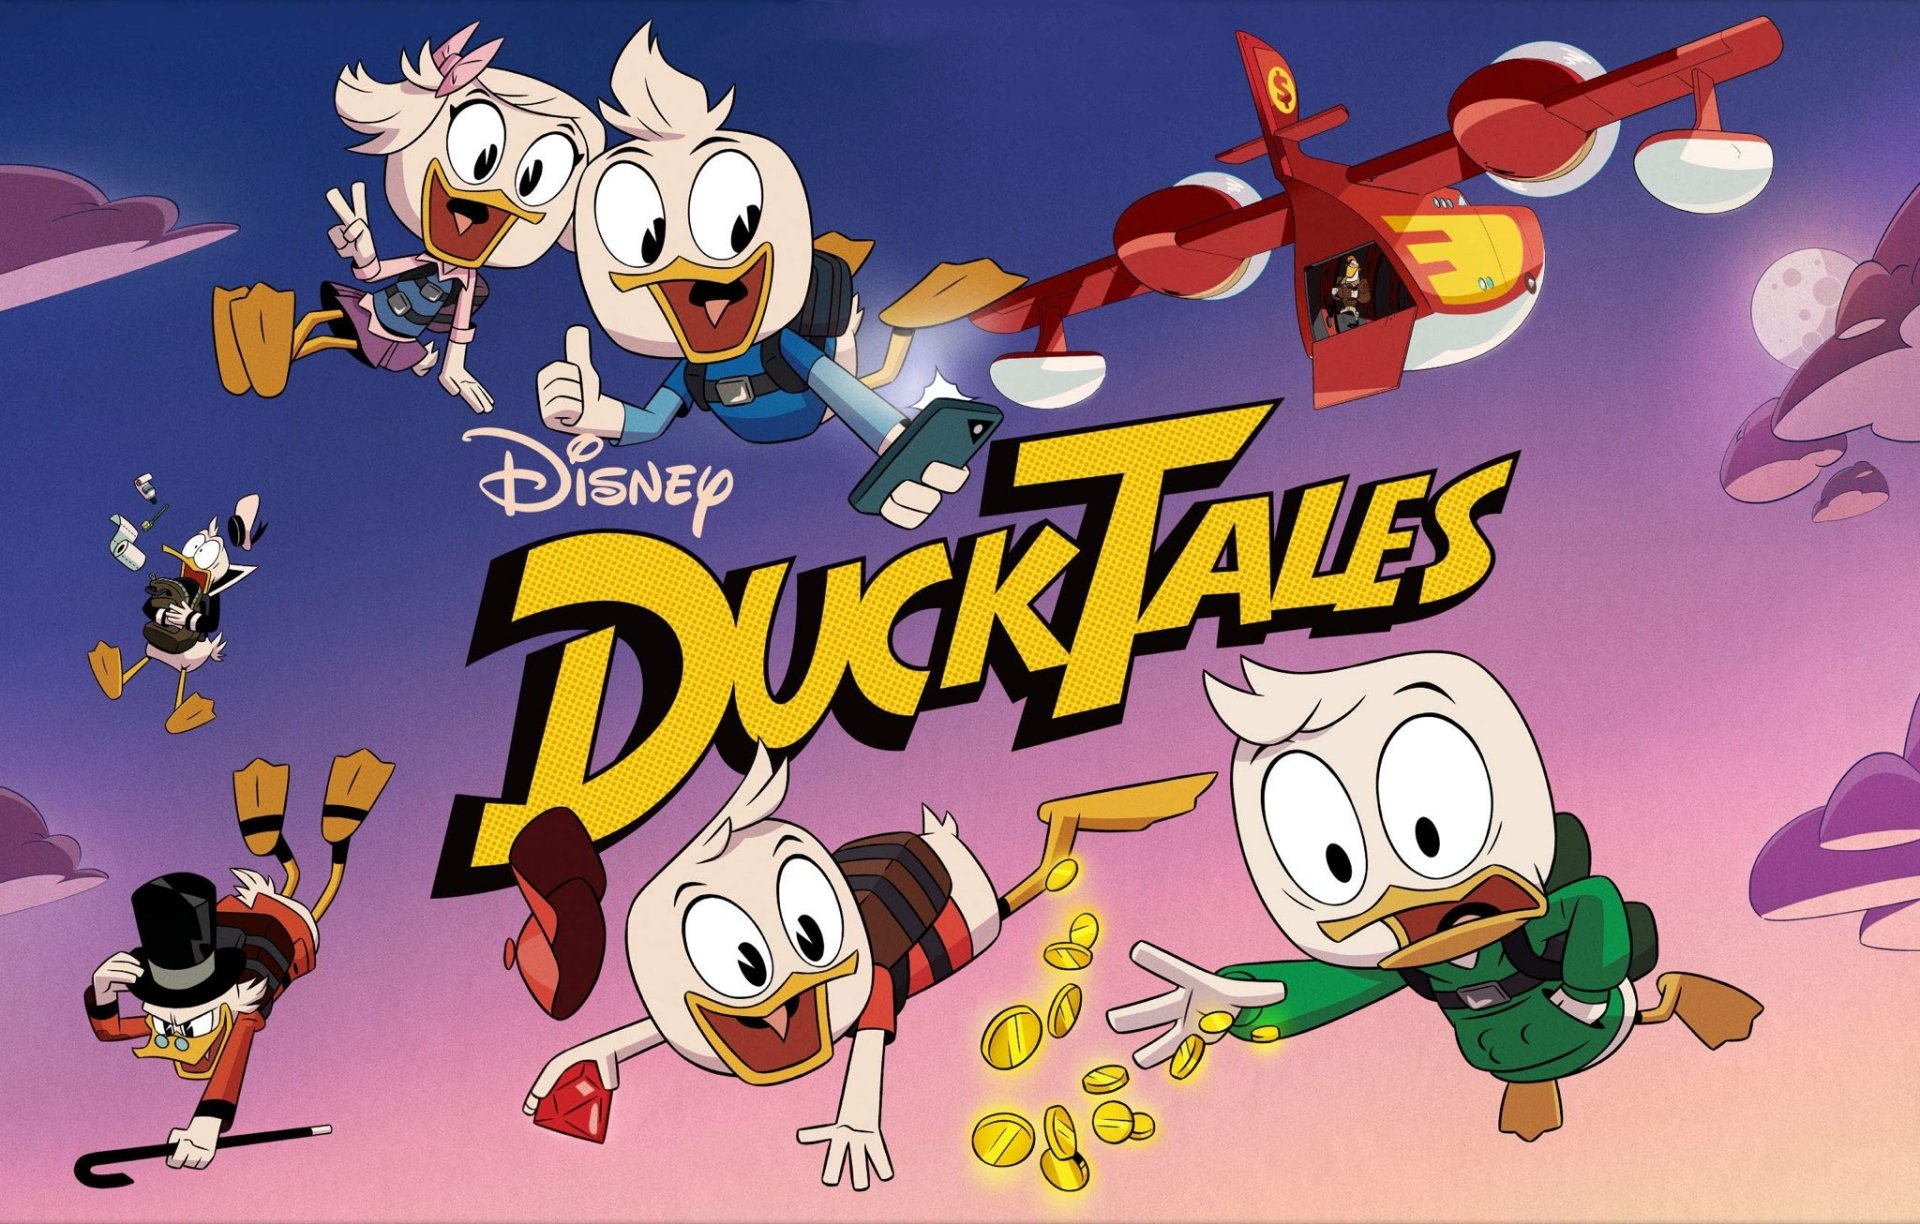 DuckTales (2017) HD Wallpapers and Backgrounds